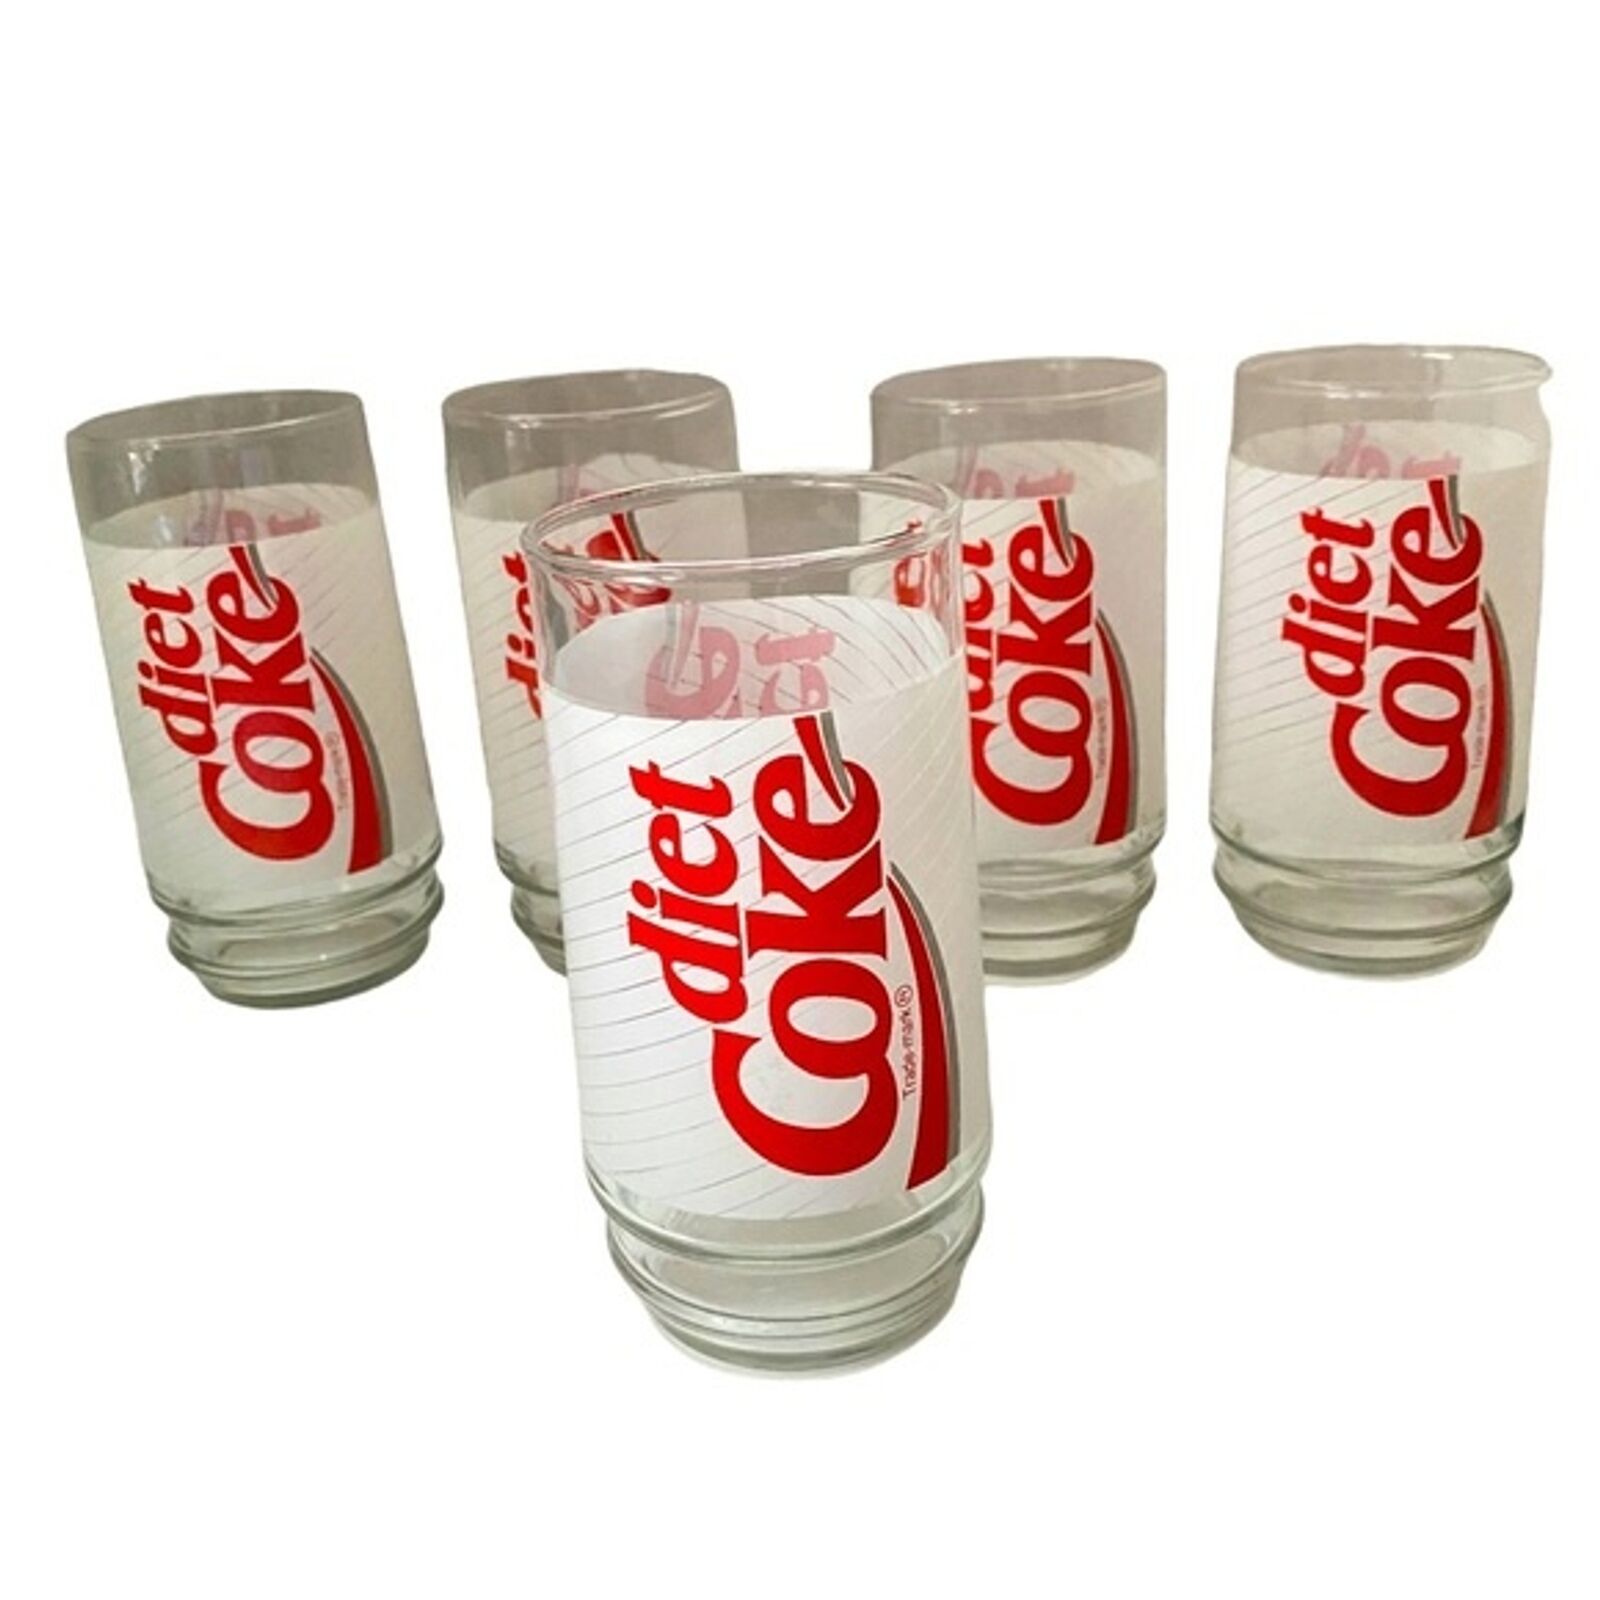 Vintage Coca-Cola Diet Coke Drinking Glass Cup Set of 5 Collectible